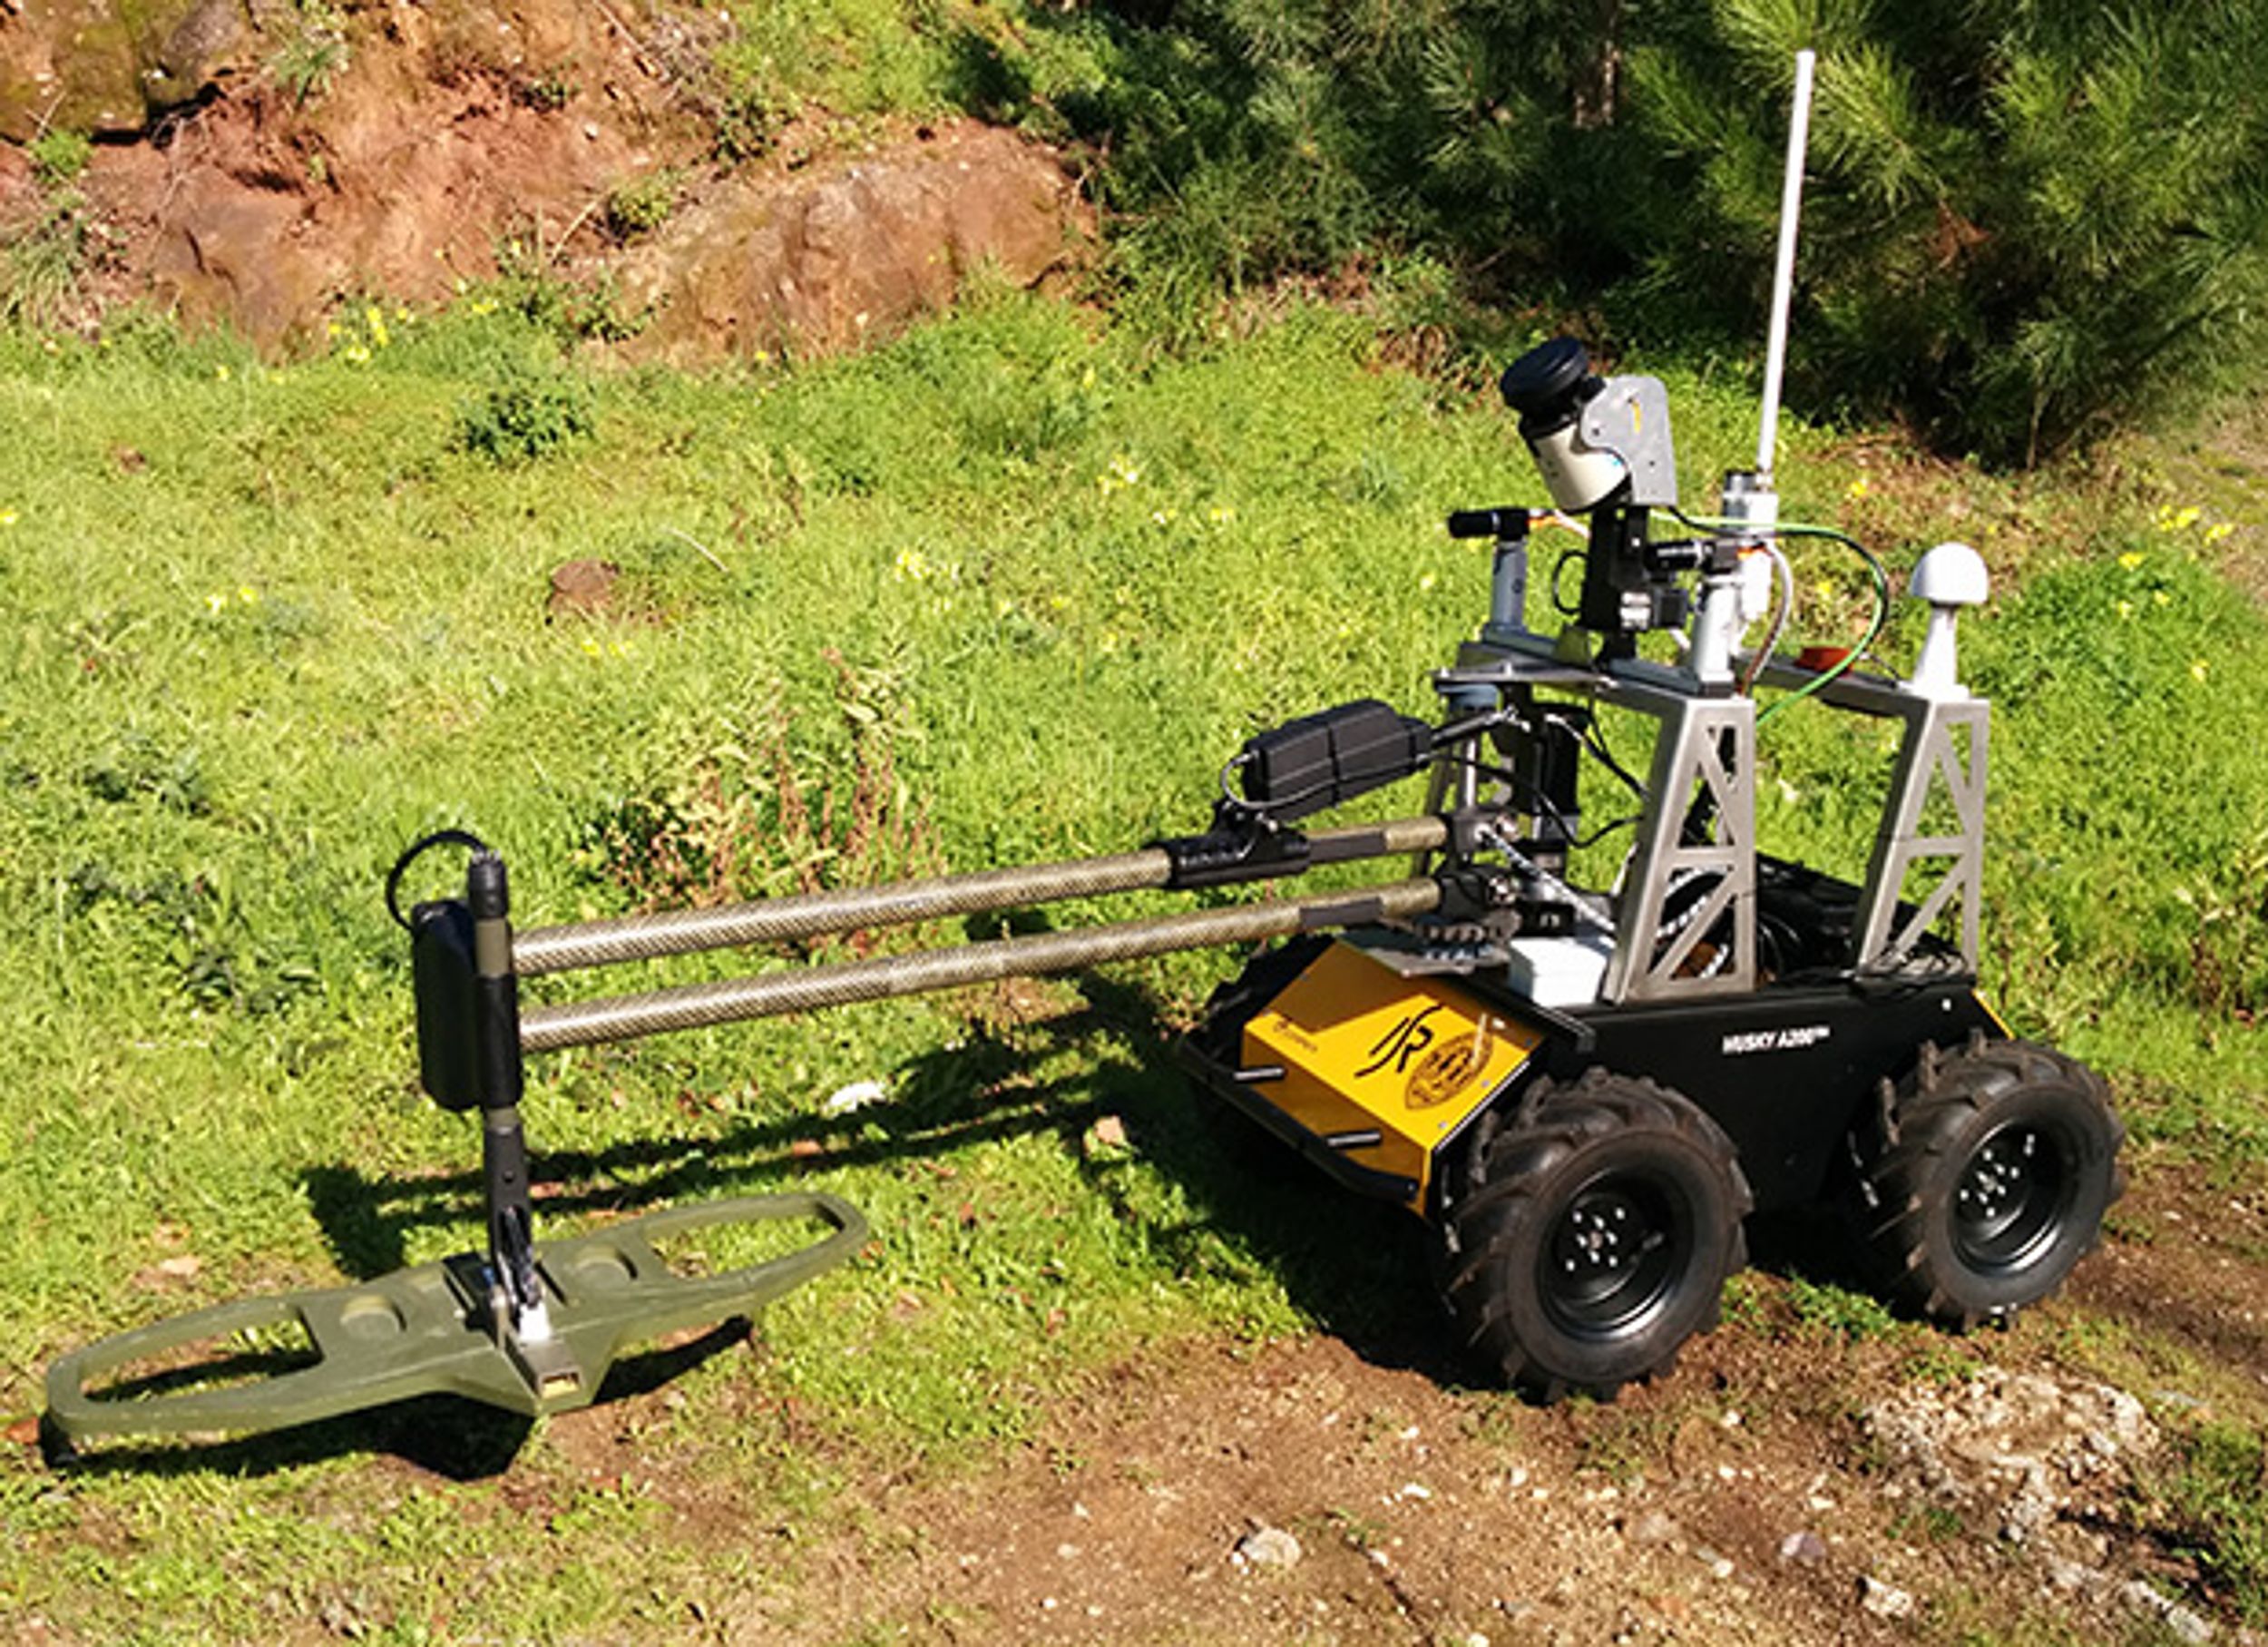 Robot Takes on Landmine Detection While Humans Stay Very Very Far Away